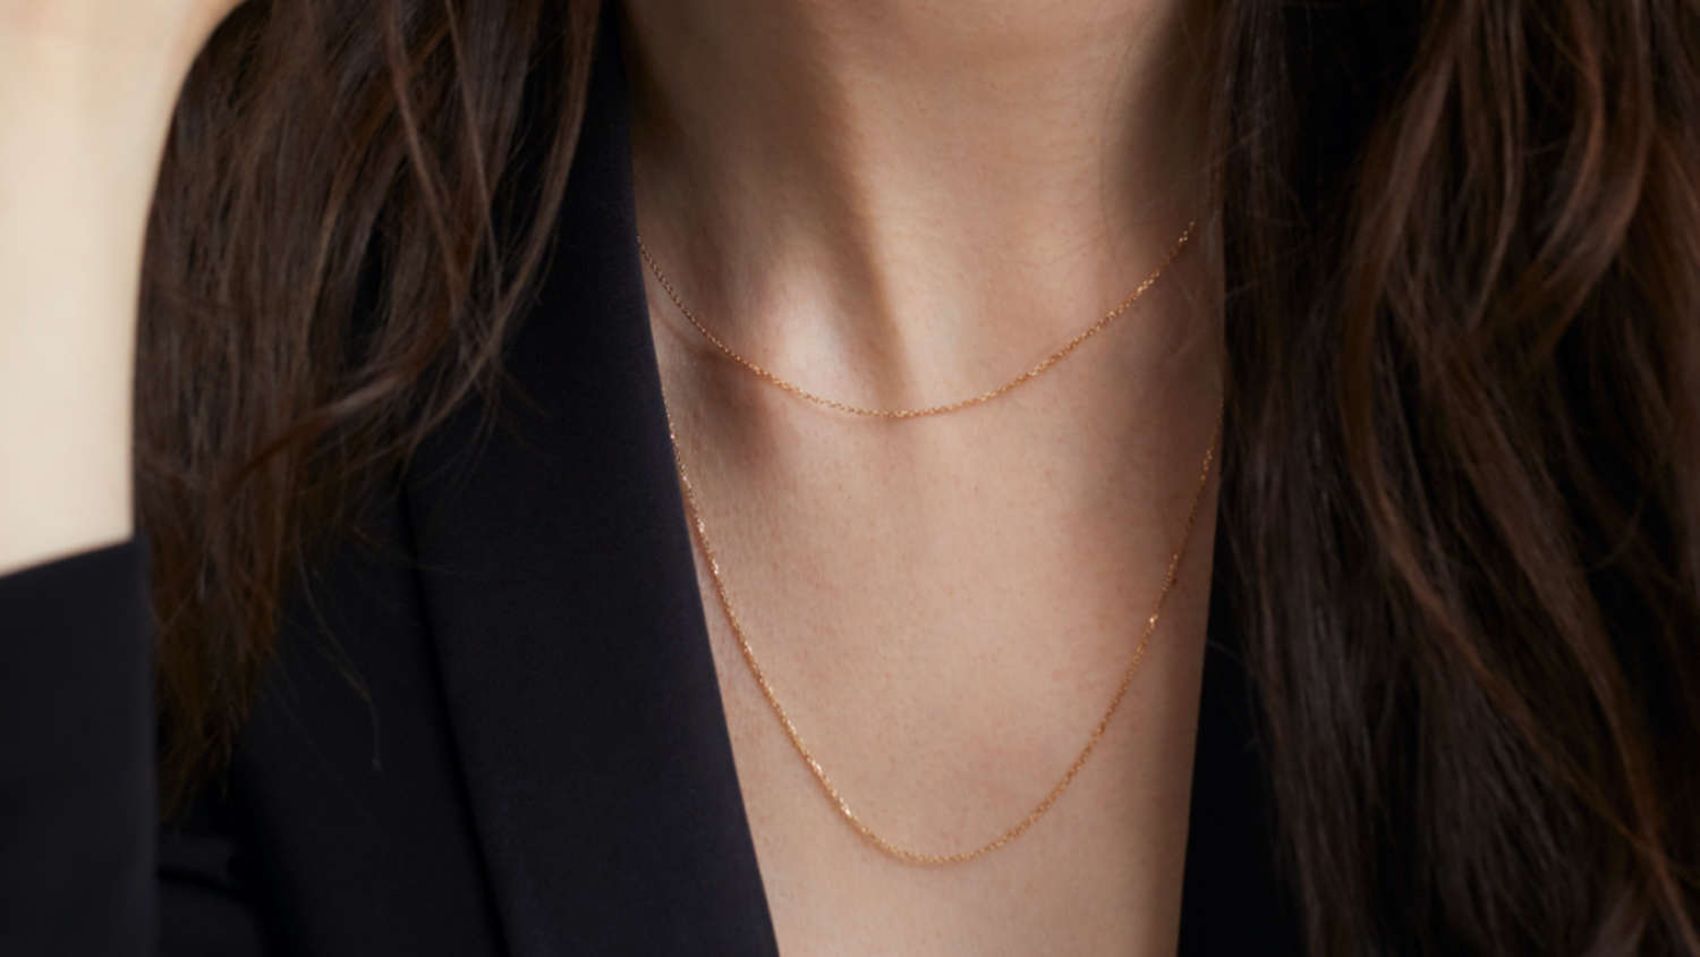 Mejuri 14K Yellow Gold Chain Necklaces: Baby Box Chain Necklace